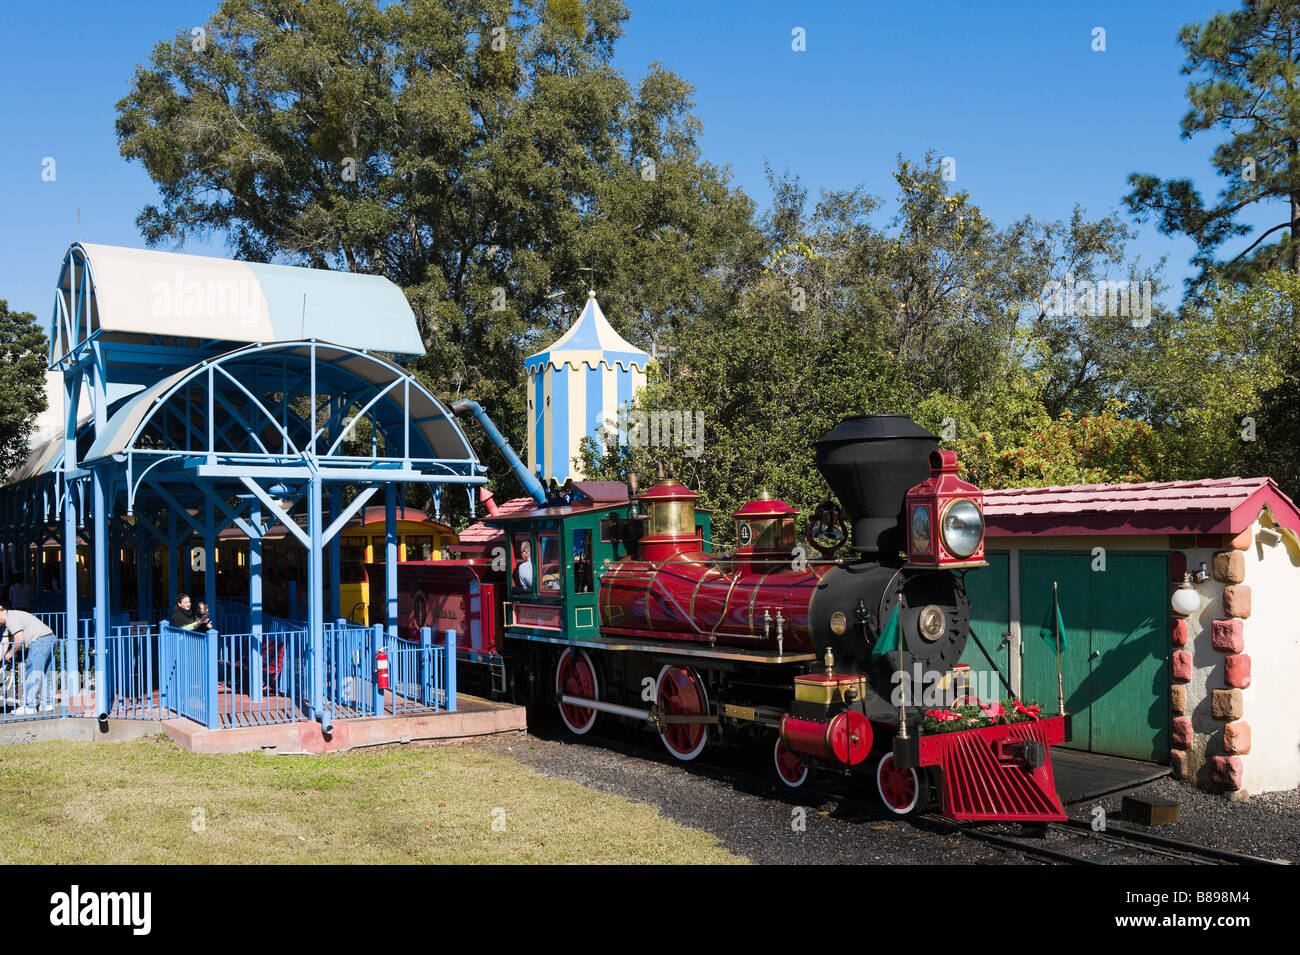 🚂 The Walt Disney World Railroad, in my view, is two attractions